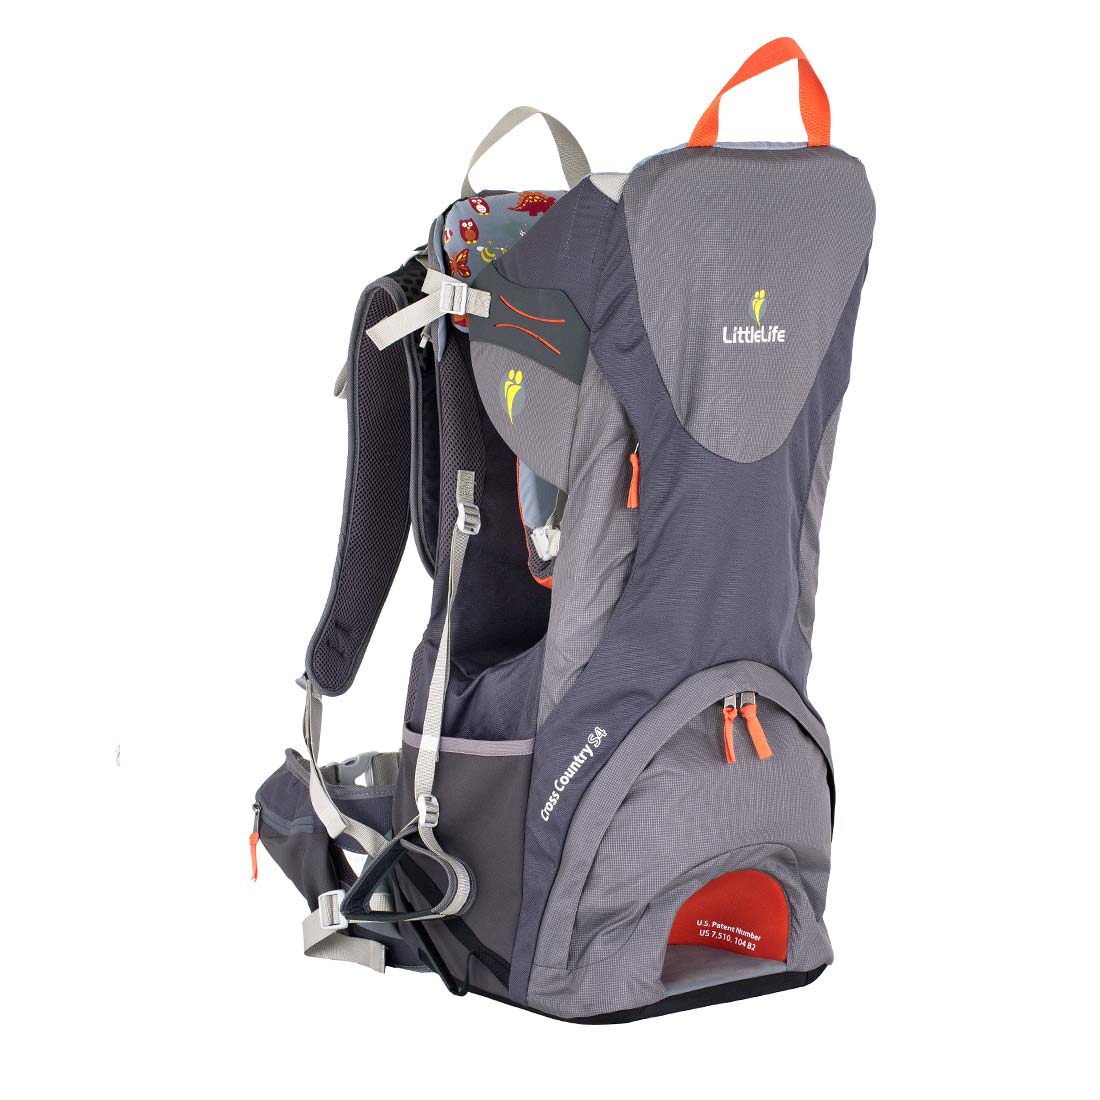 Cross Country S4 Child Carrier (Grey)